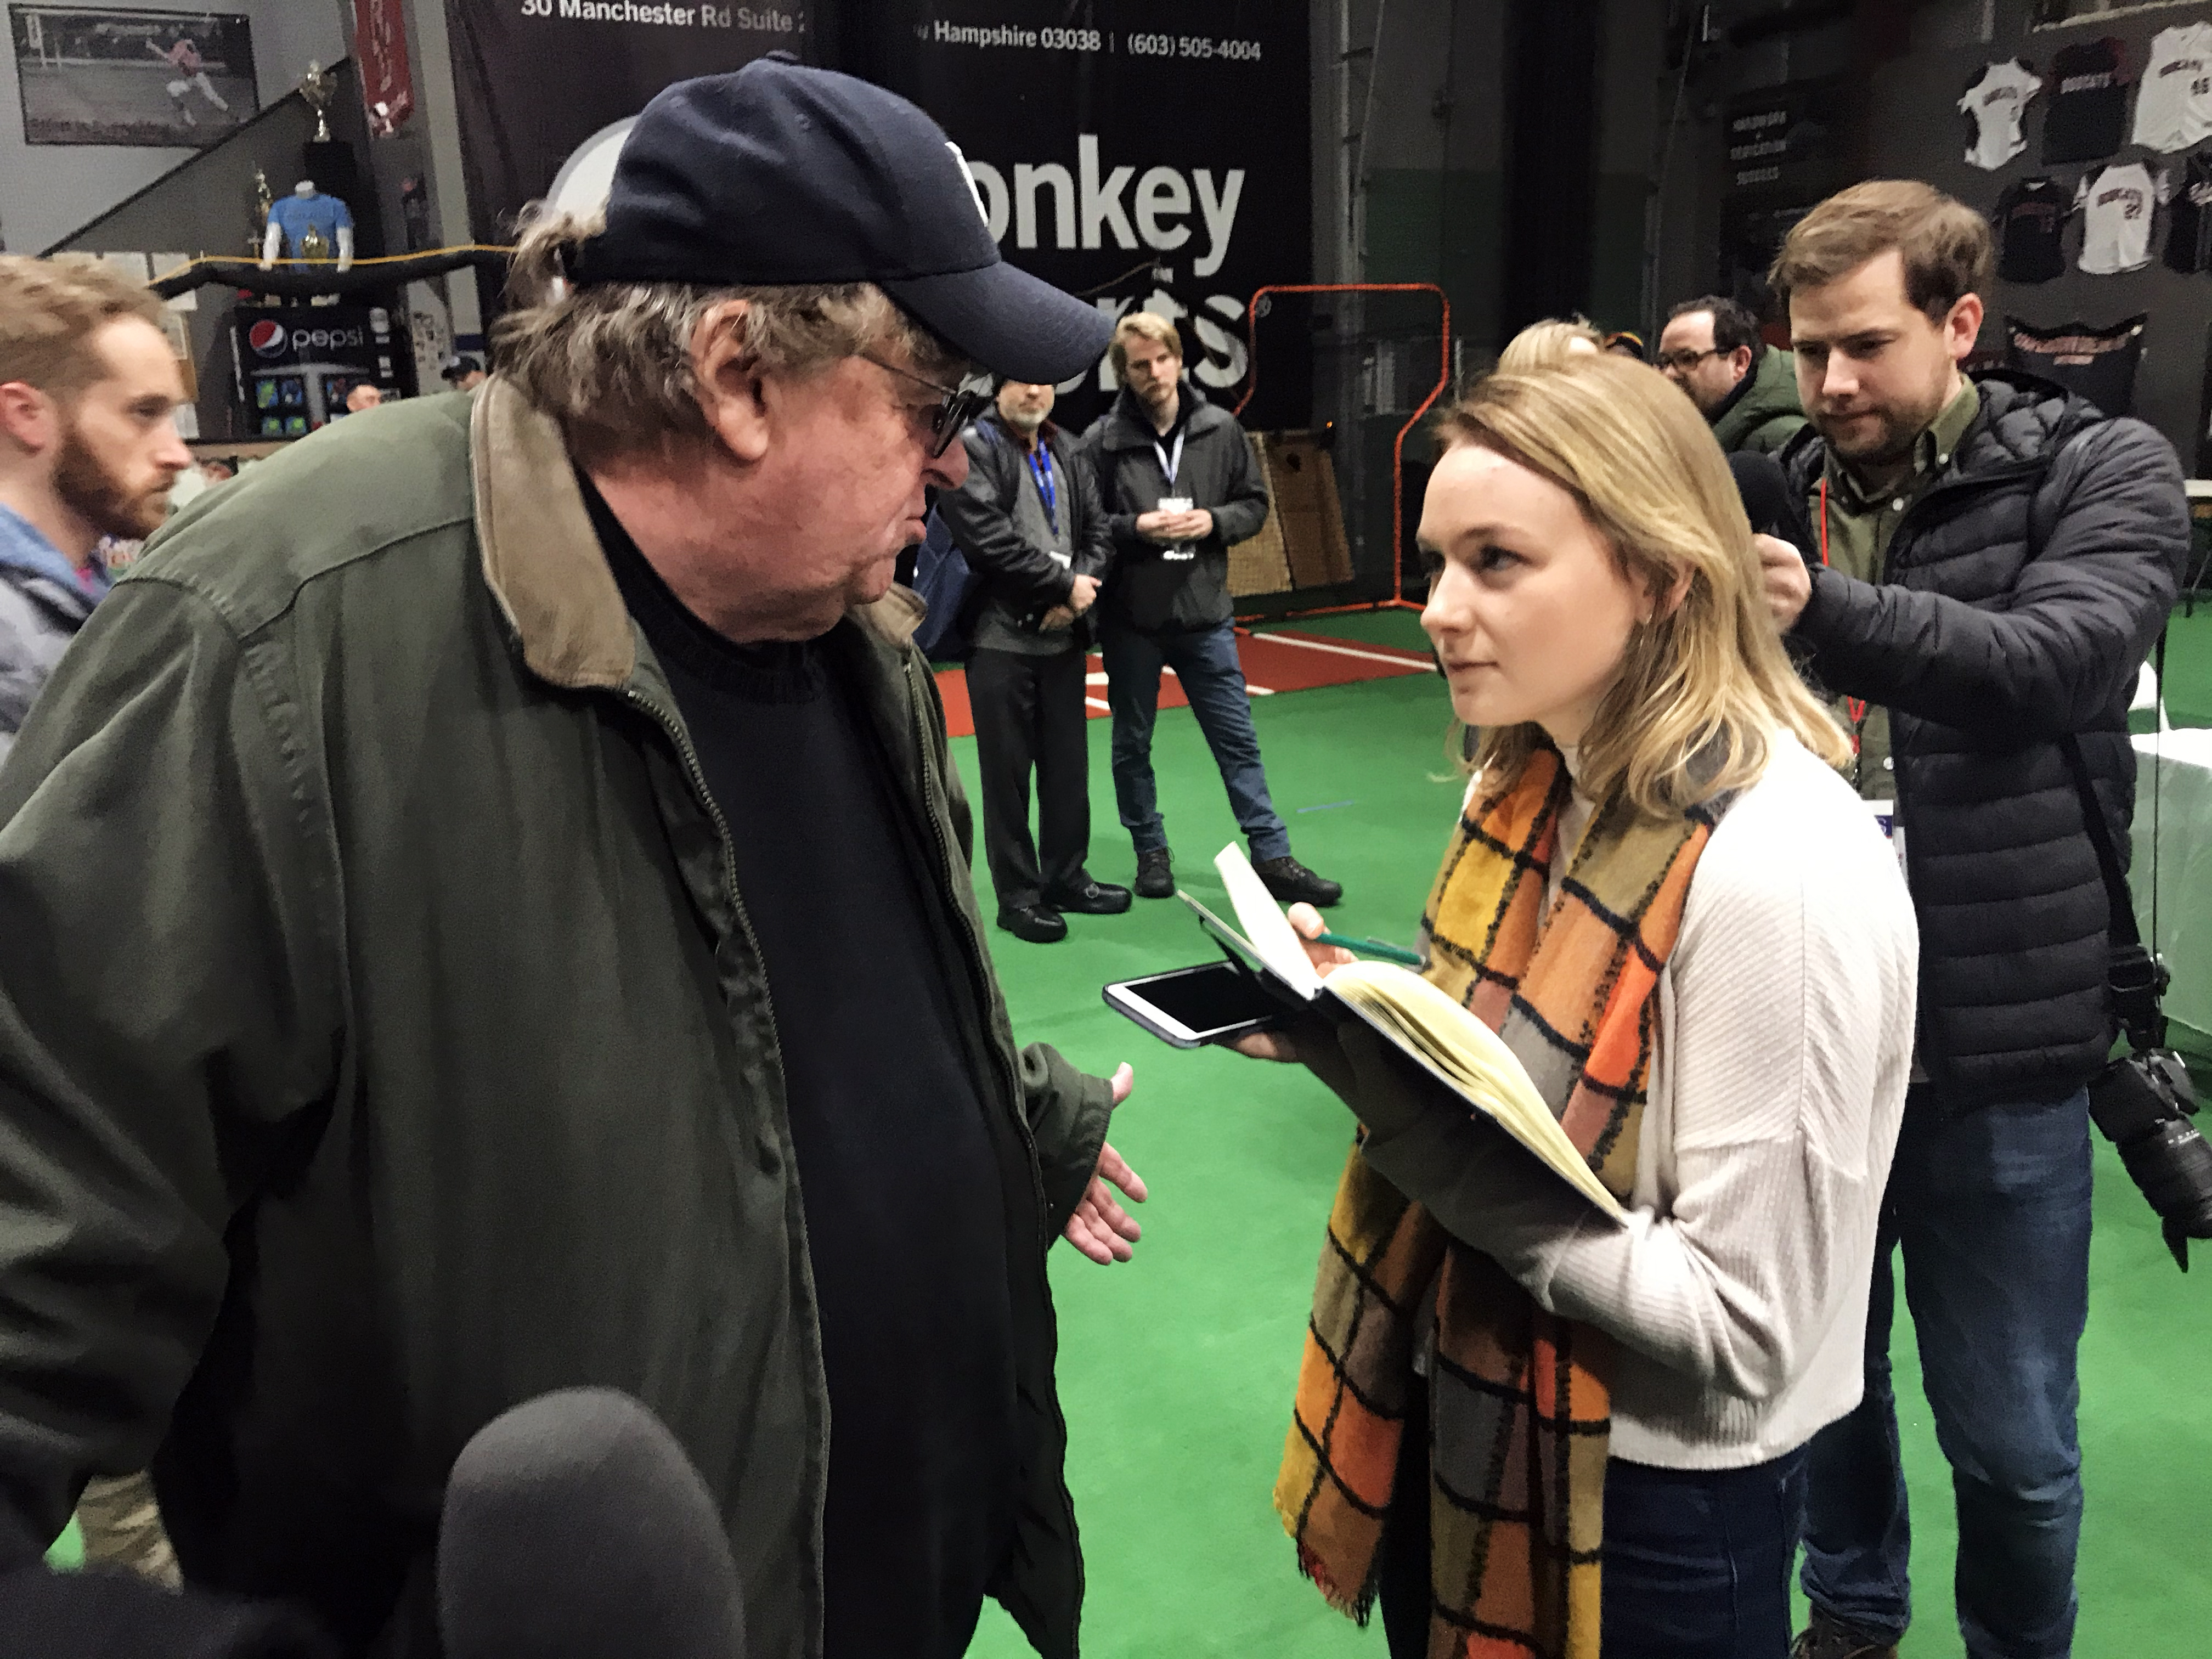 SOC student Karissa Waddick corners filmmaker Michael Moore to ask questions following a Sanders watch party in New Hampshire on Friday.